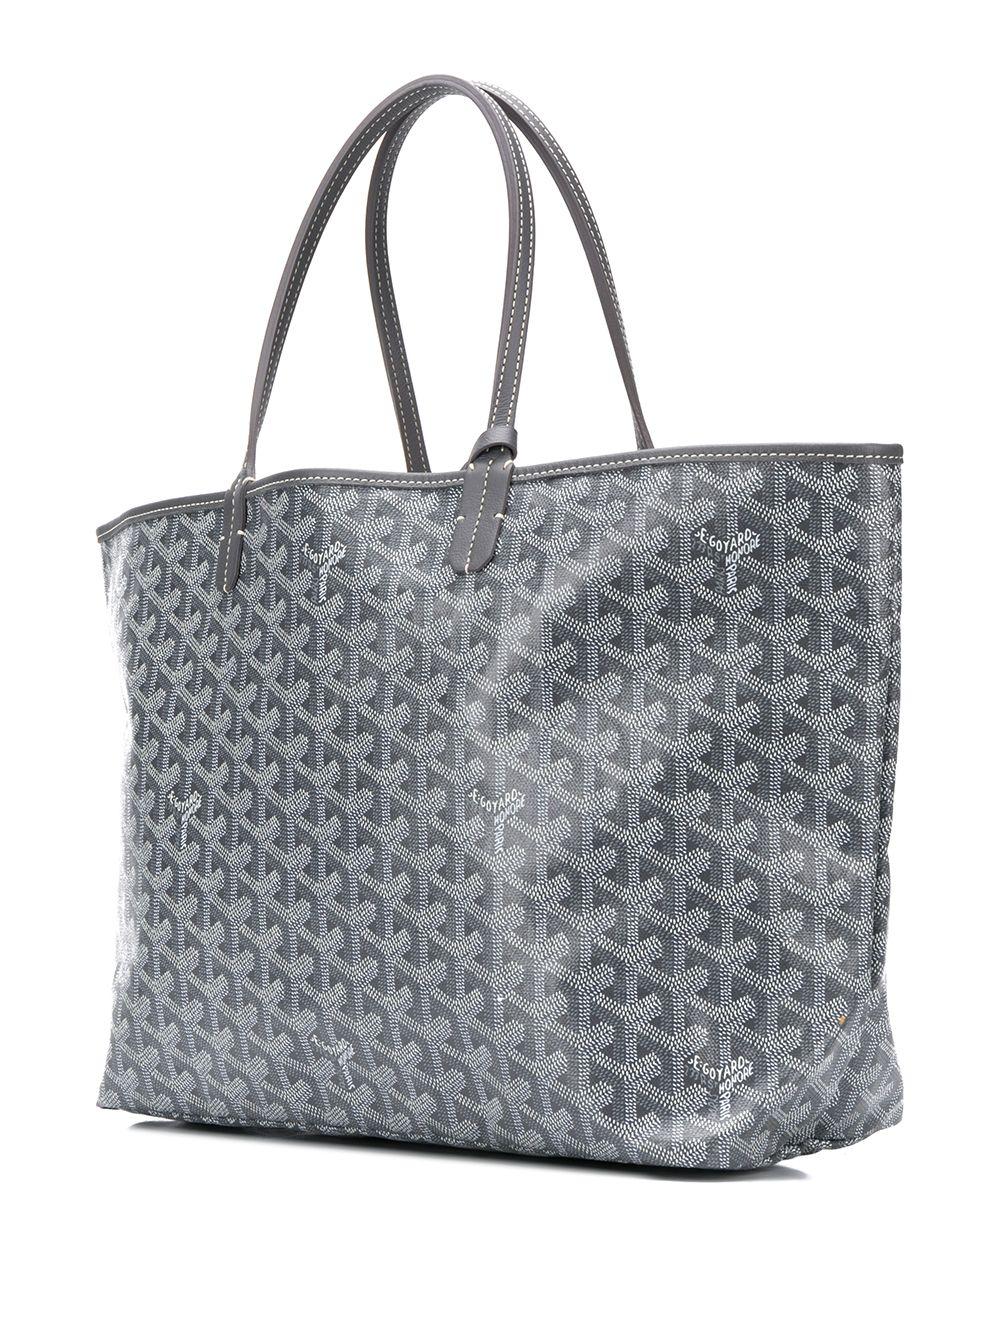 Originally designed as a beach bag, the St Louis bag references King Louis IX of France. Its grey monogram leather displays a kaleidoscope of hand-painted butterflies. The Goyard St Louis handbag is distinctive for its shopper silhouette, with a